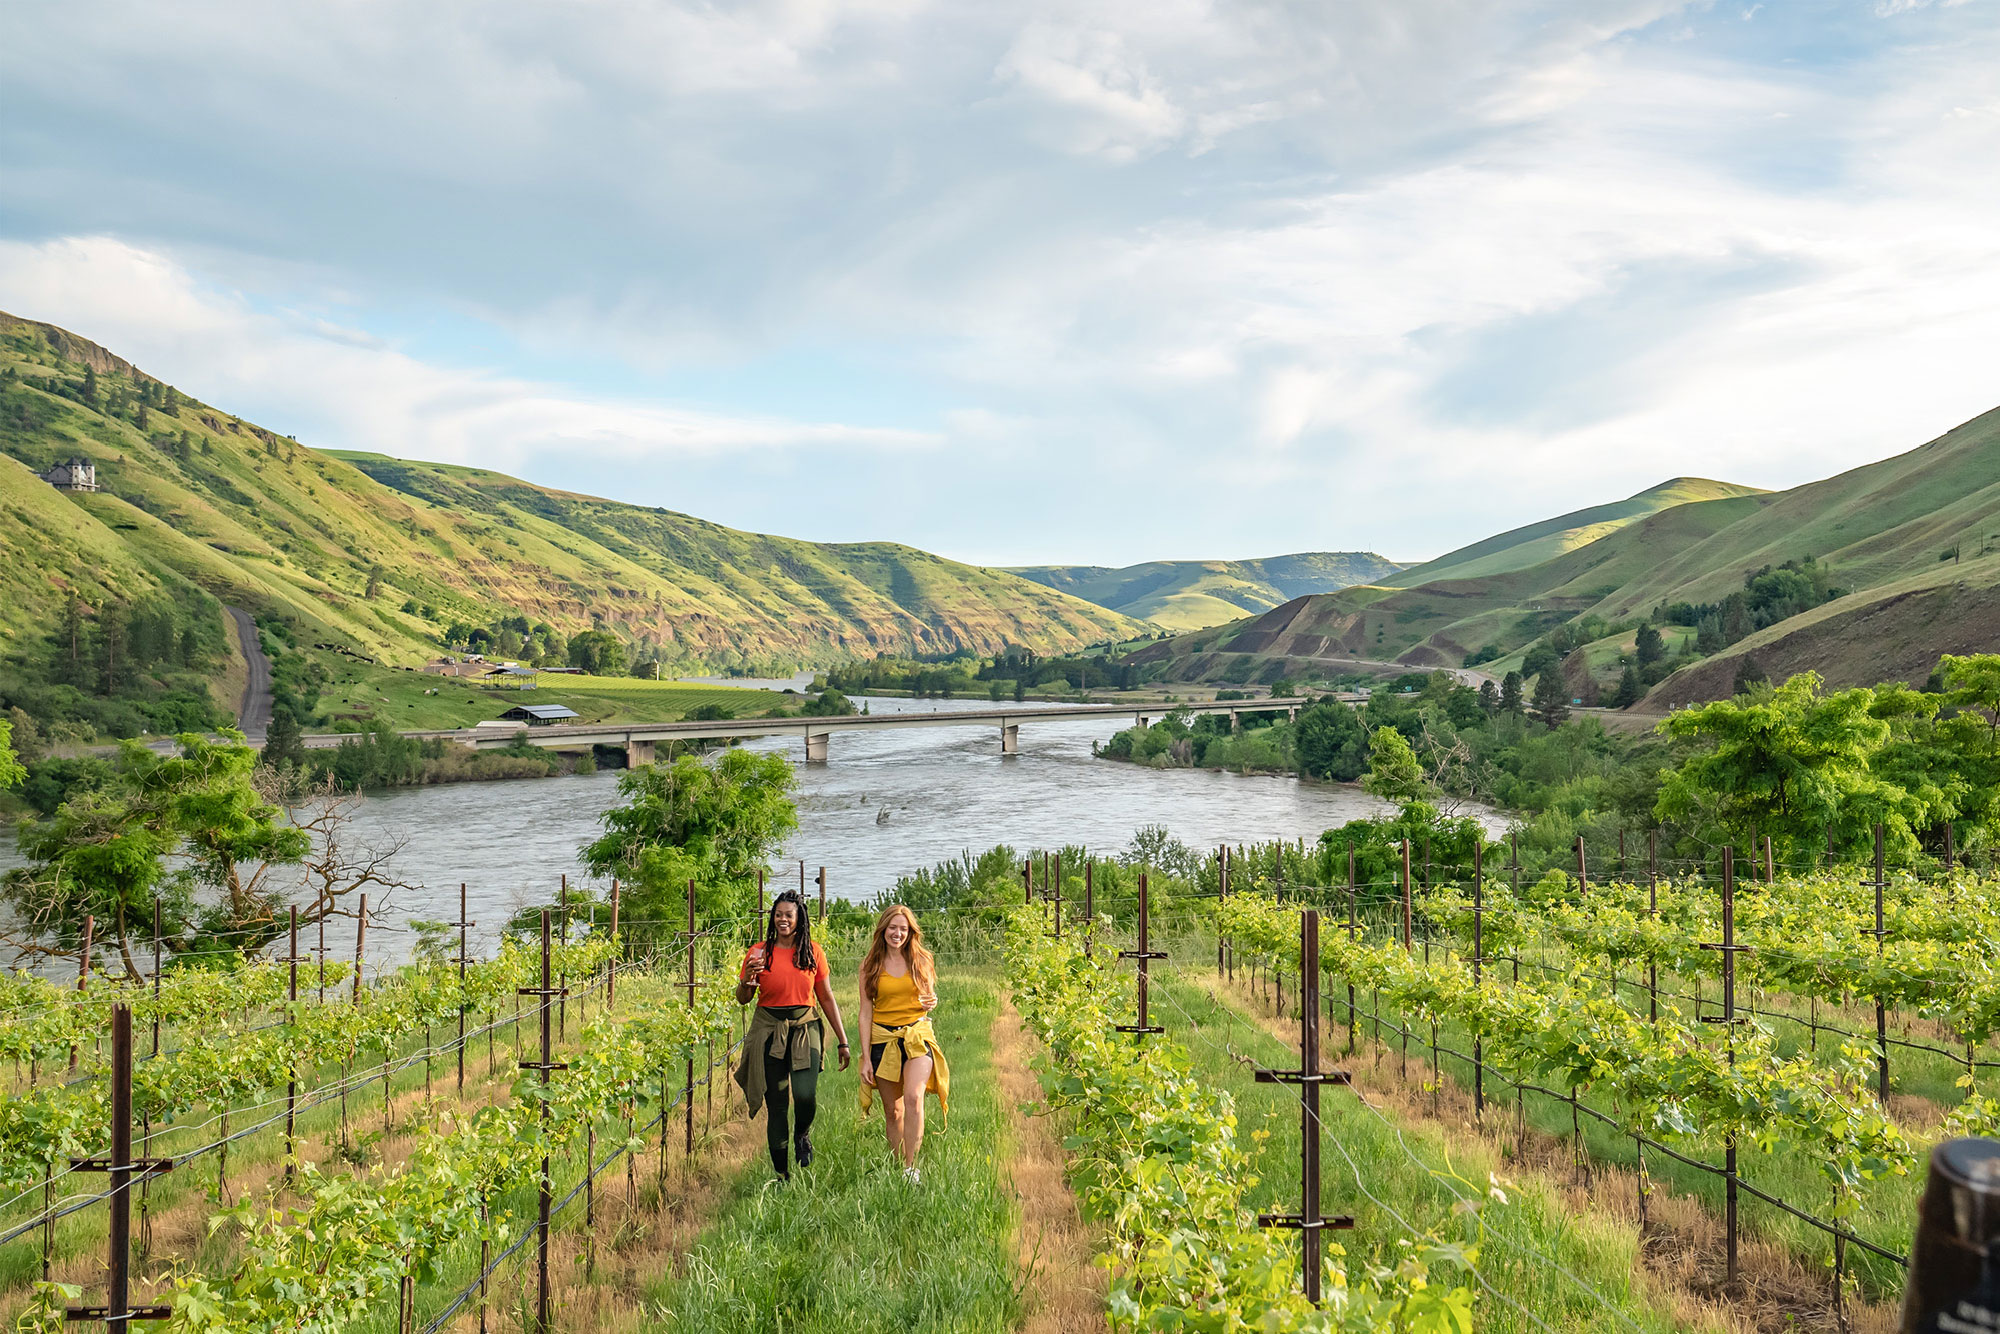 Two women walking through a vineyard with a river and mountains in the background